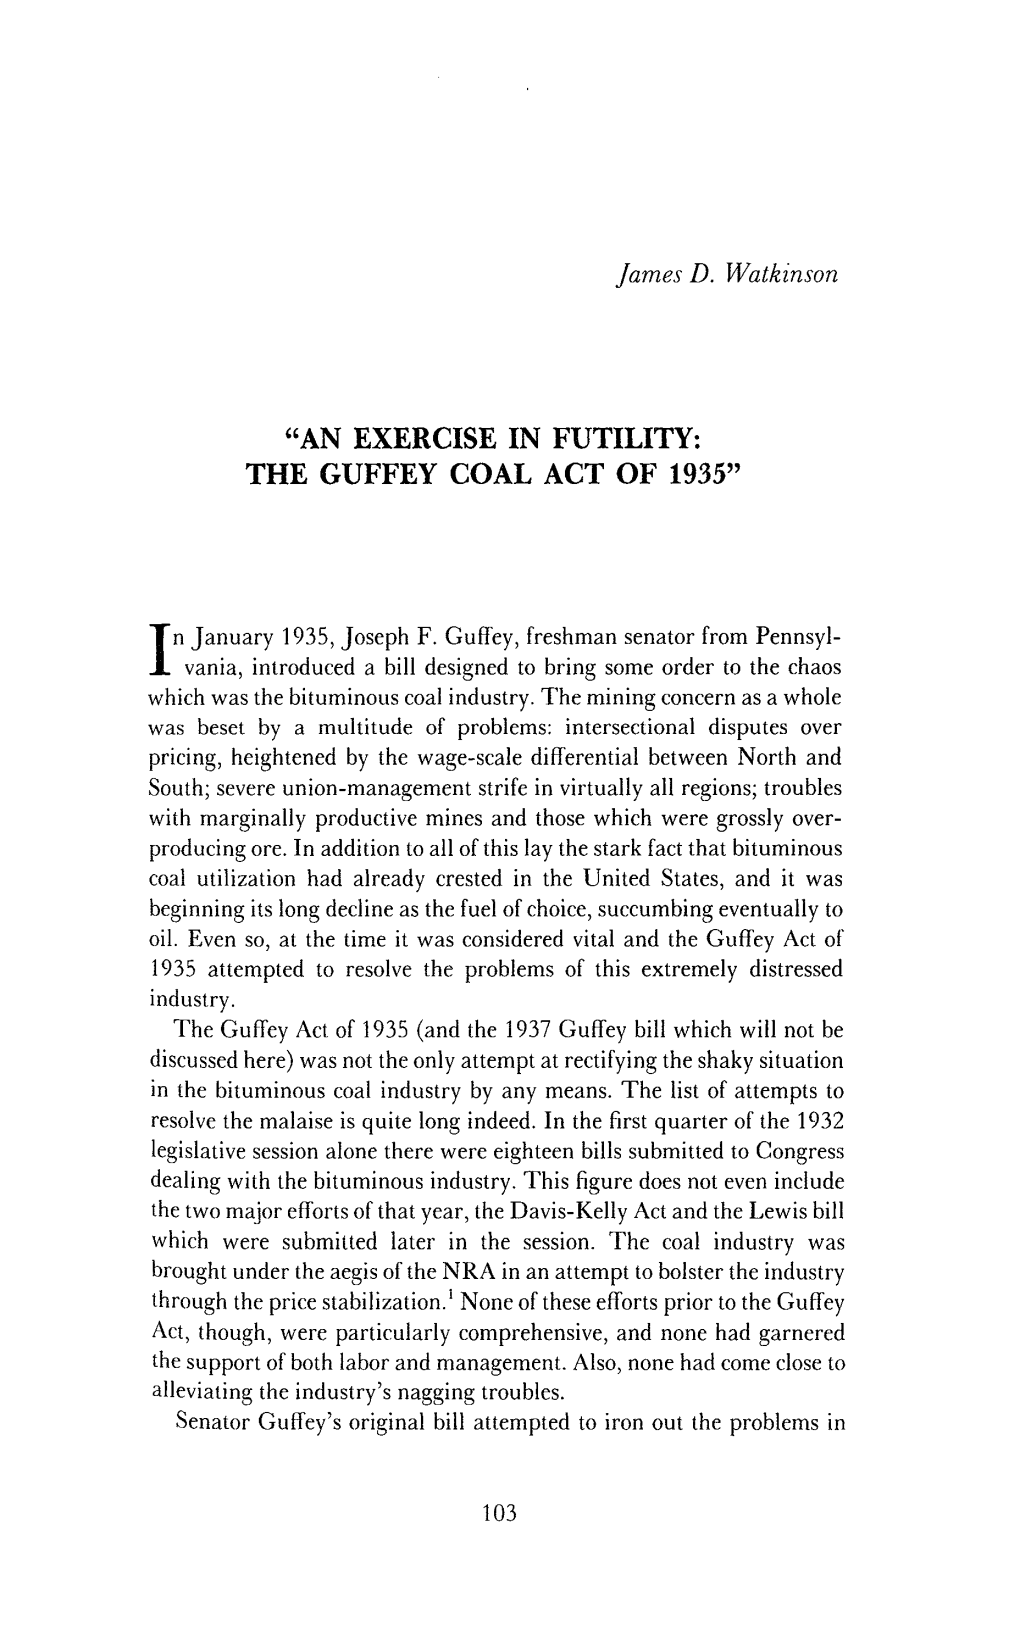 "An Exercise in Futility: the Guffey Coal Act of 1935"